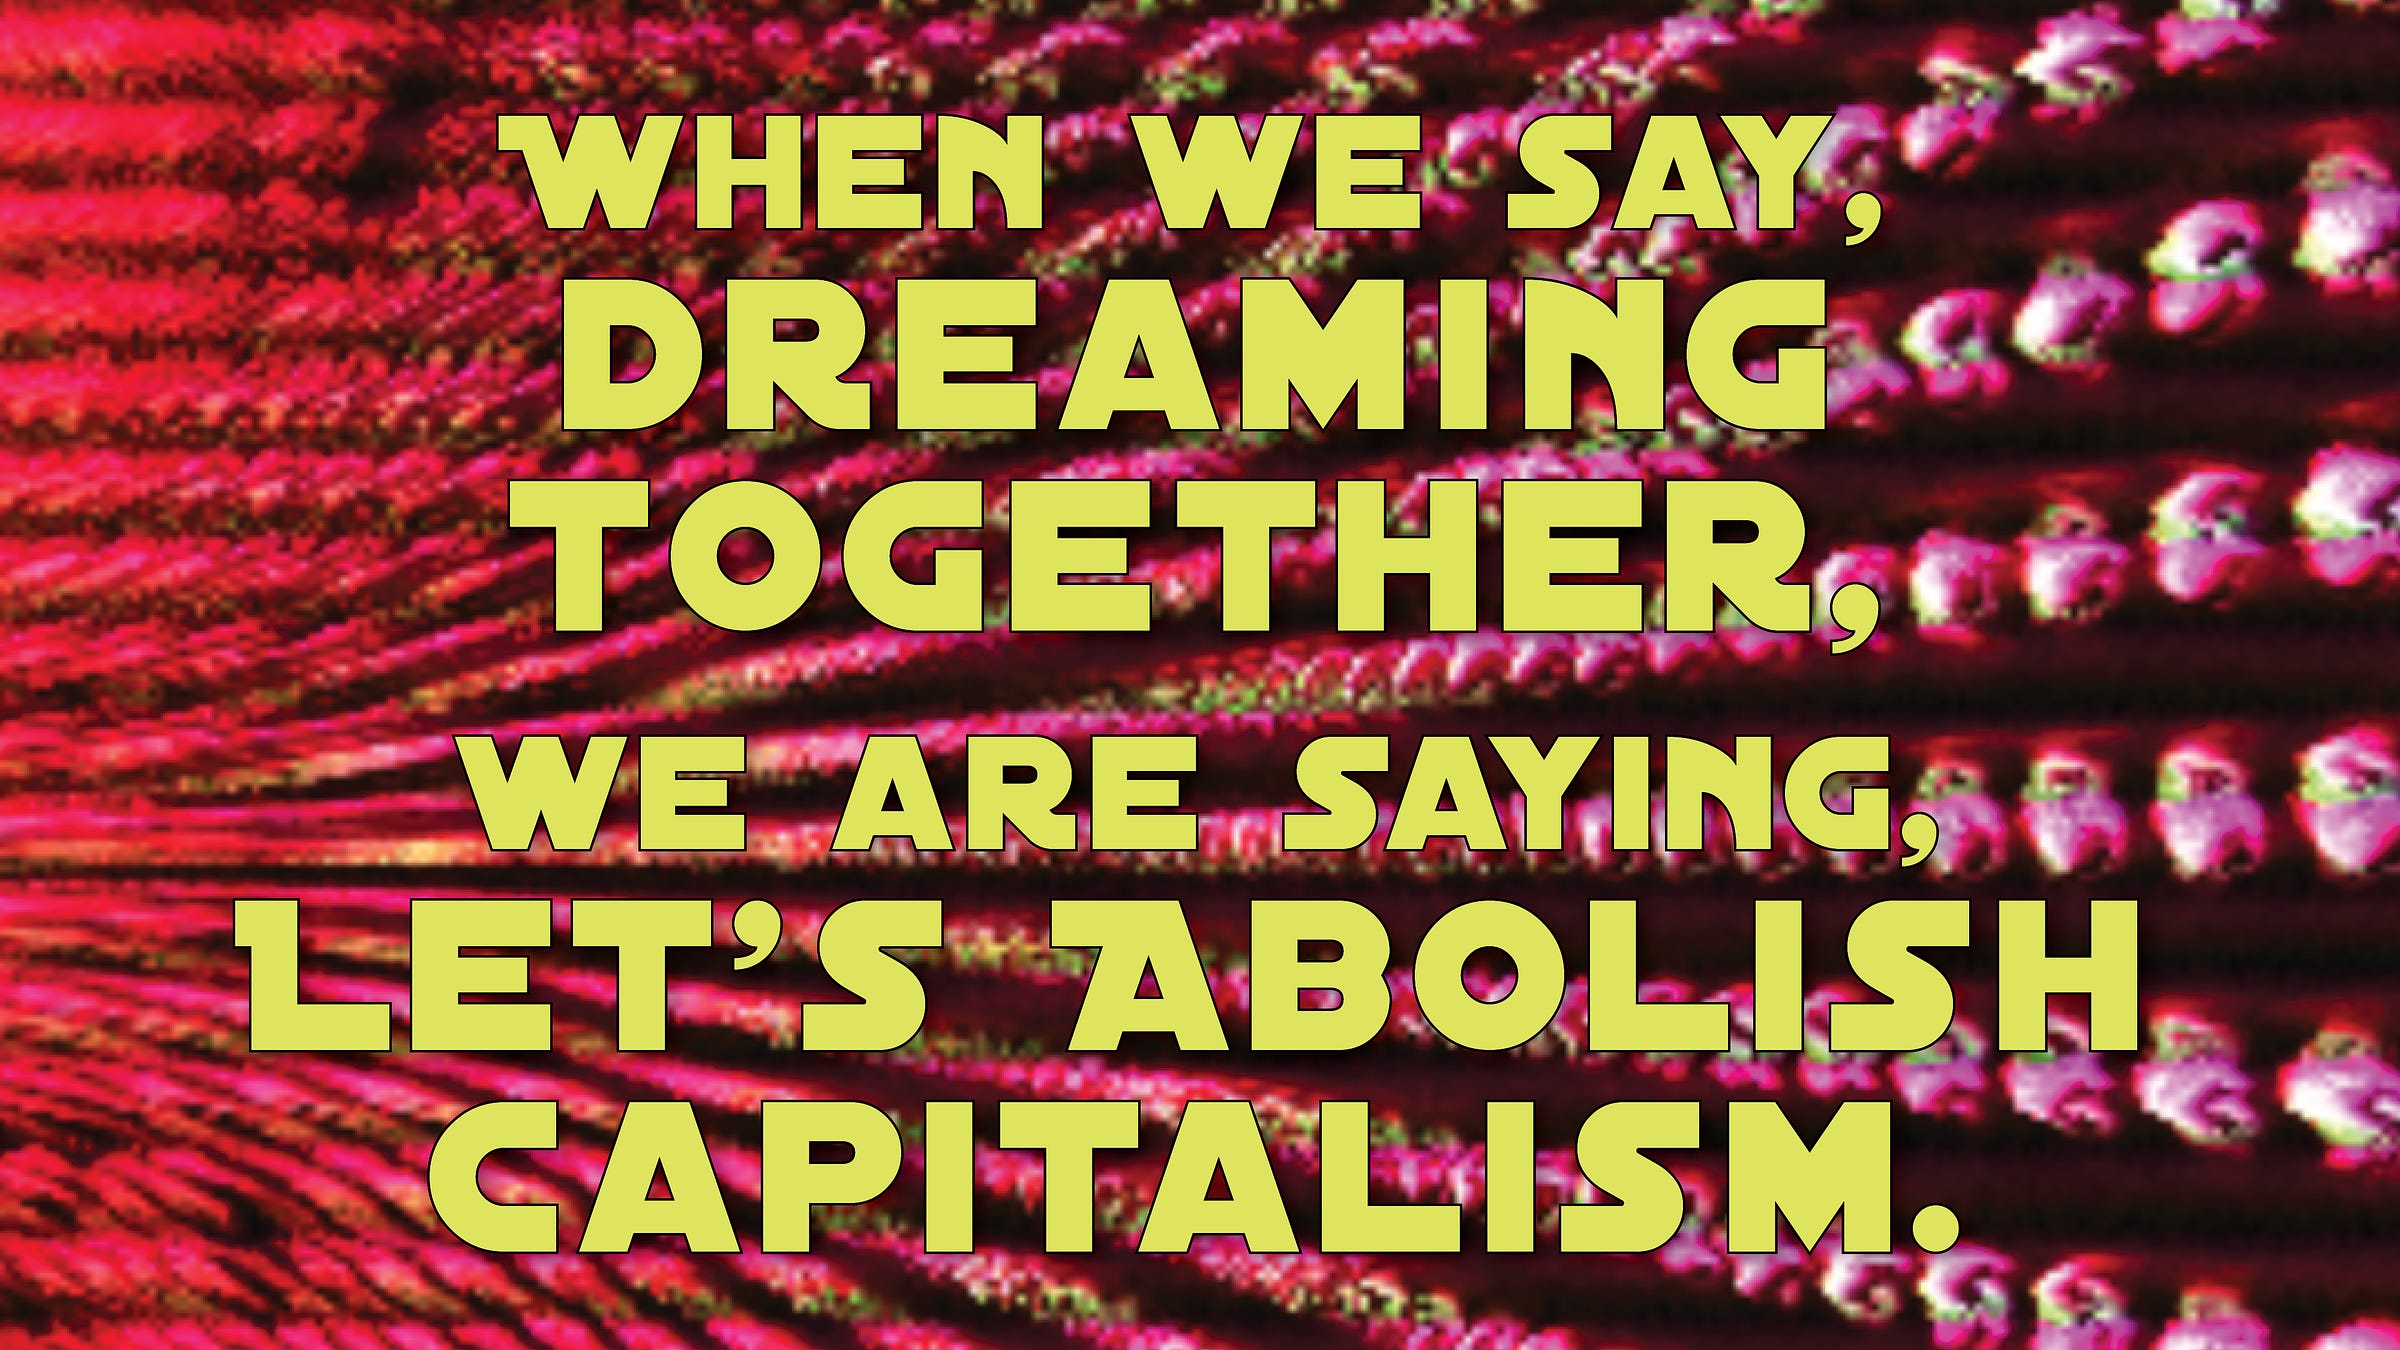 Text in a futuristic font reads, "WHEN WE SAY DREAMING, WE ARE SAYING LET'S ABOLISH CAPITALISM" set against a red and pink background that looks like its vanishing to the left.